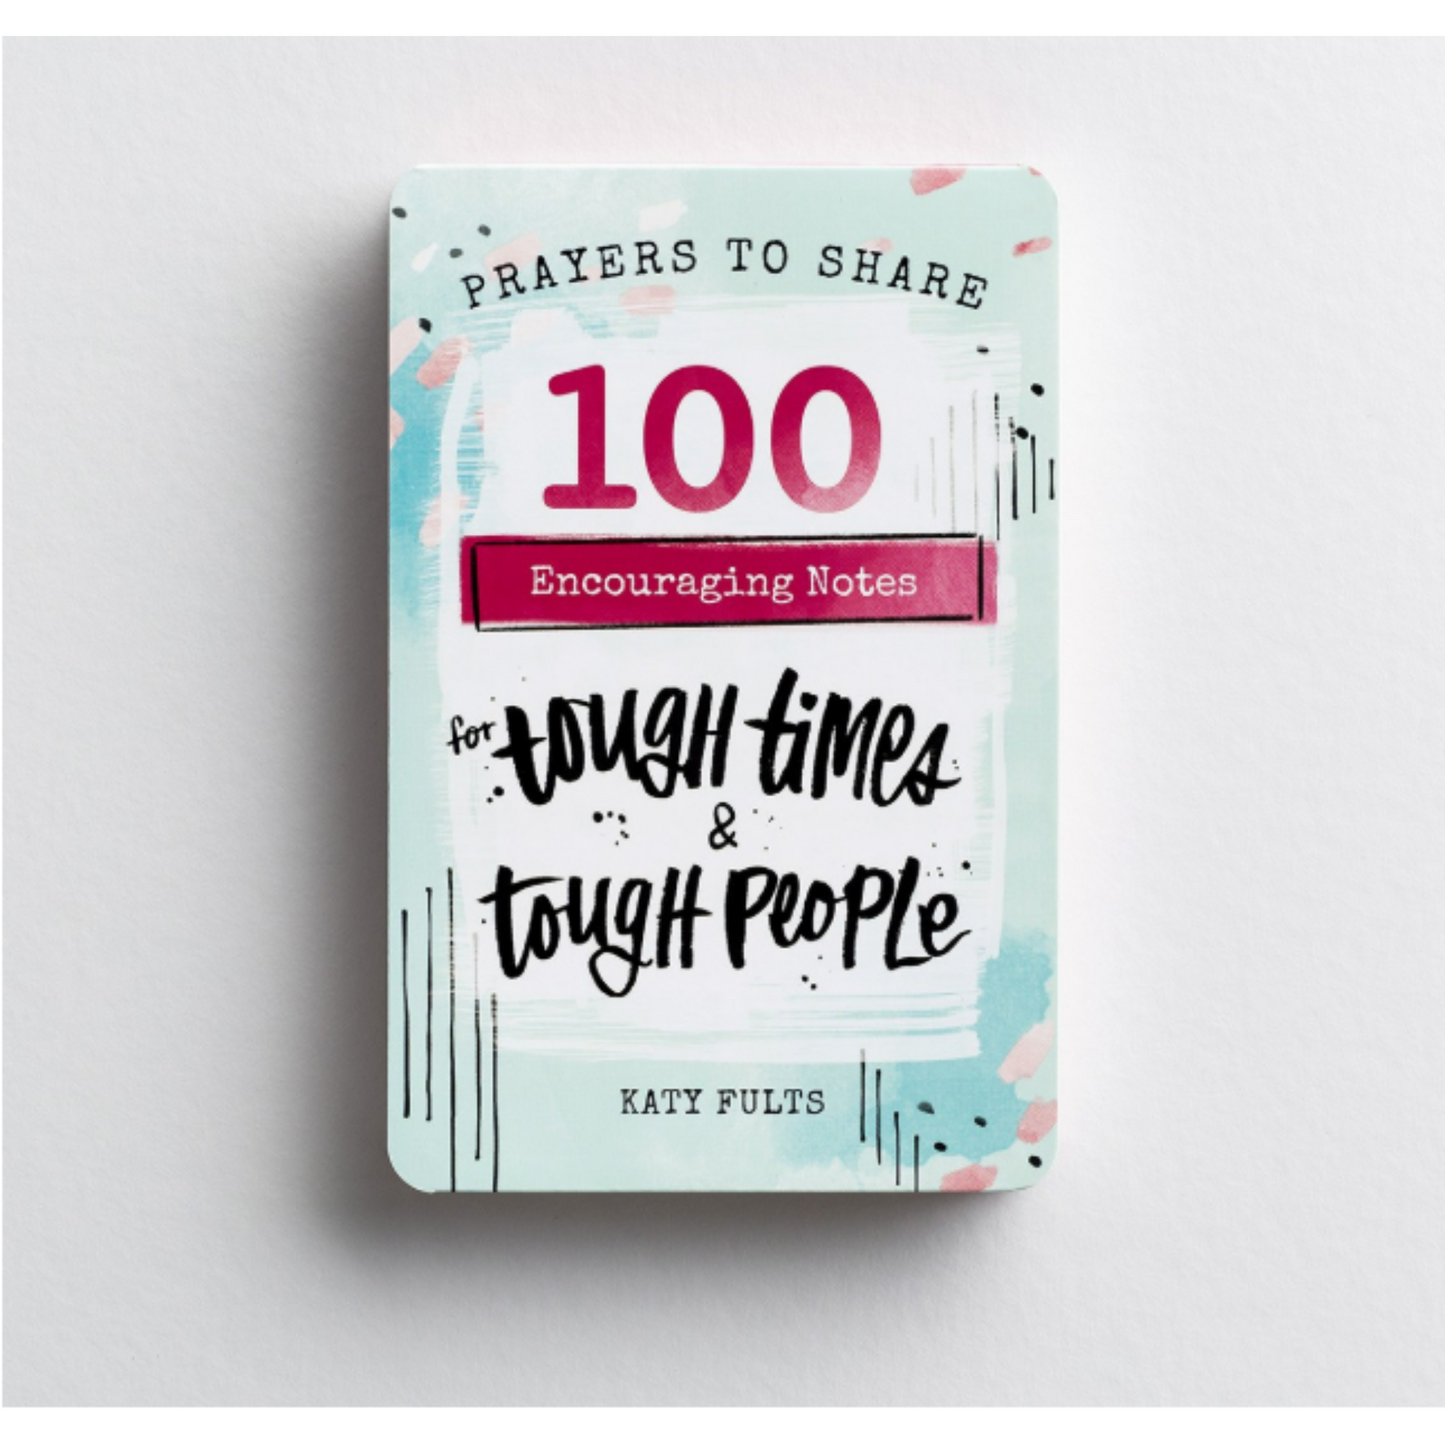 Prayers To Share: 100 Encouraging Notes For Tough Times & Tough People (#89900)